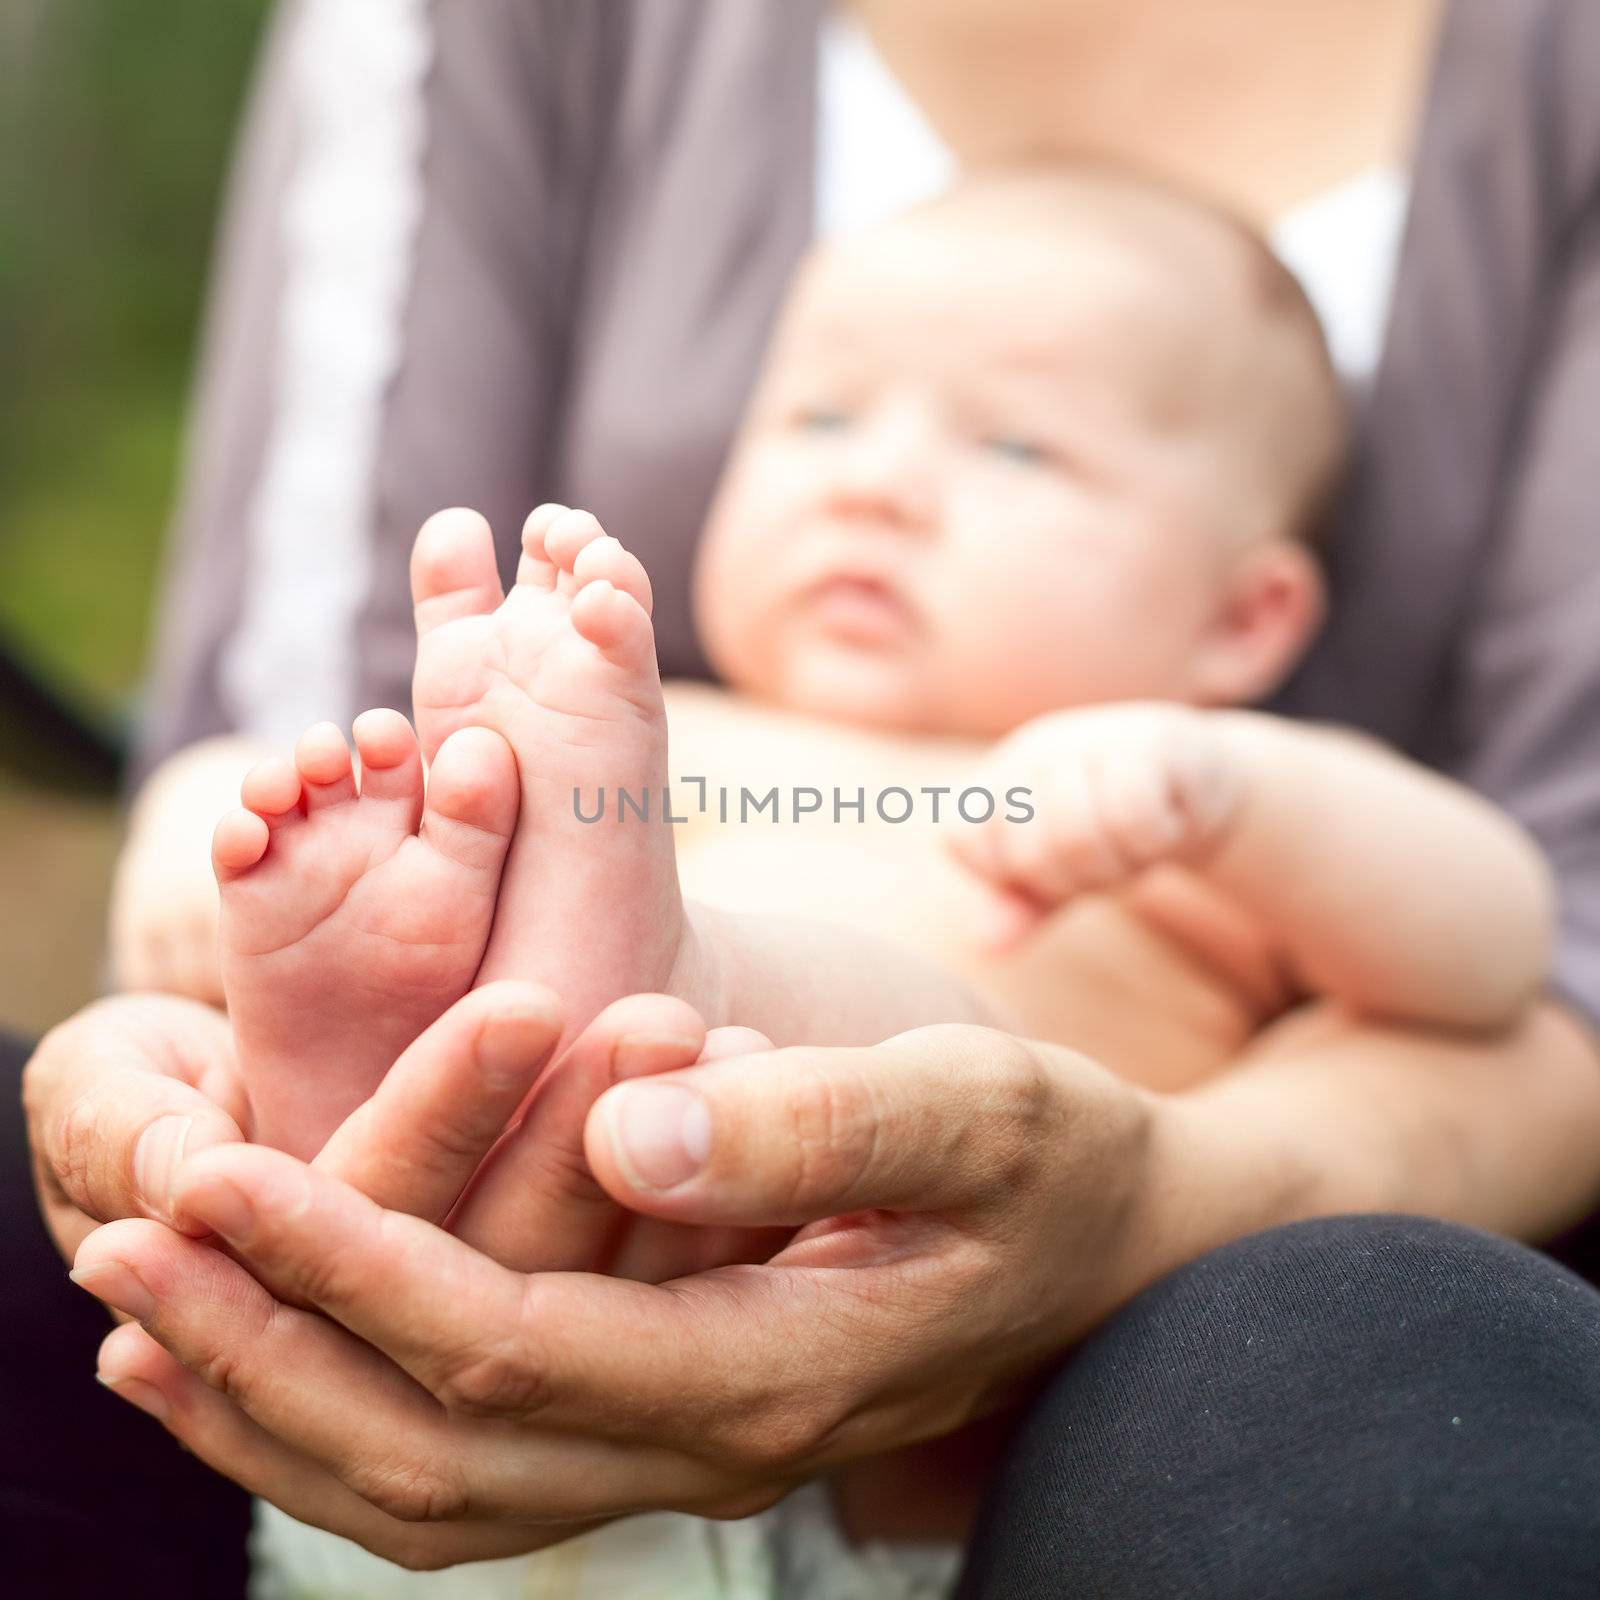 Mother with baby outdoor by naumoid